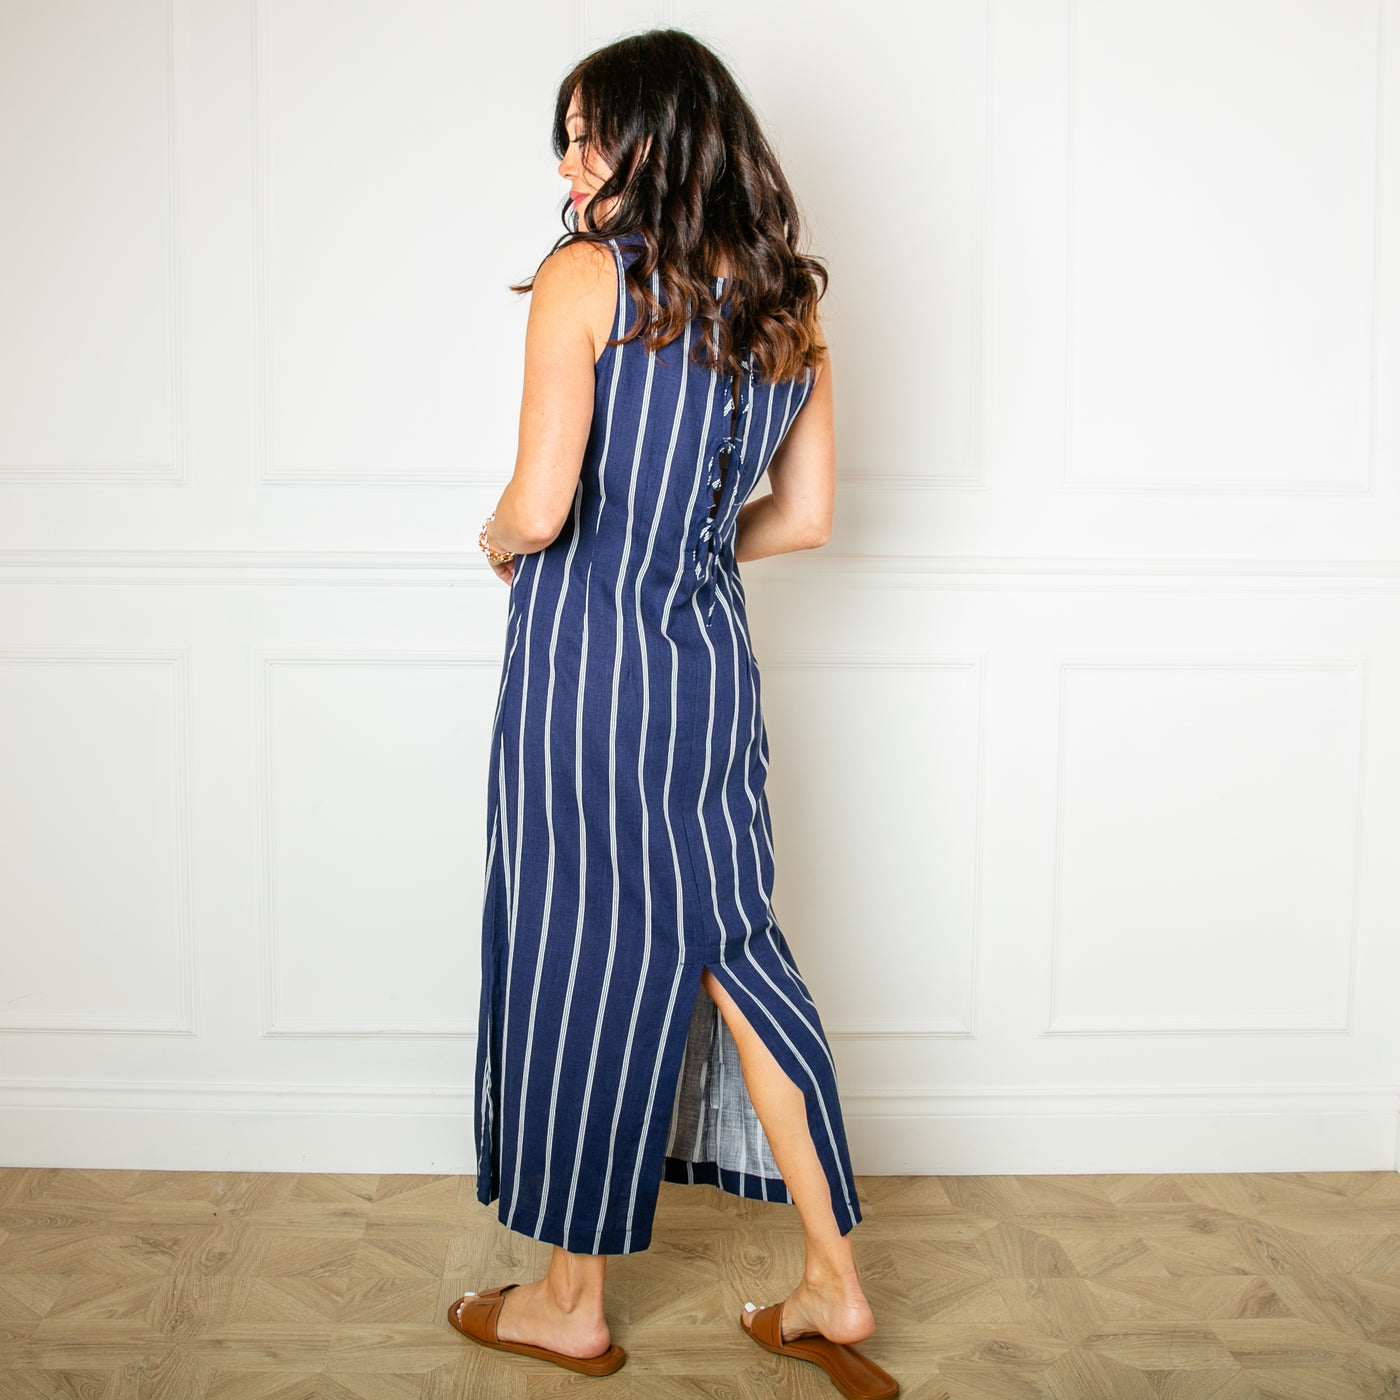 The navy blue Linen Tie Back Maxi Dress featuring gorgeous tie up bow detailing on the back